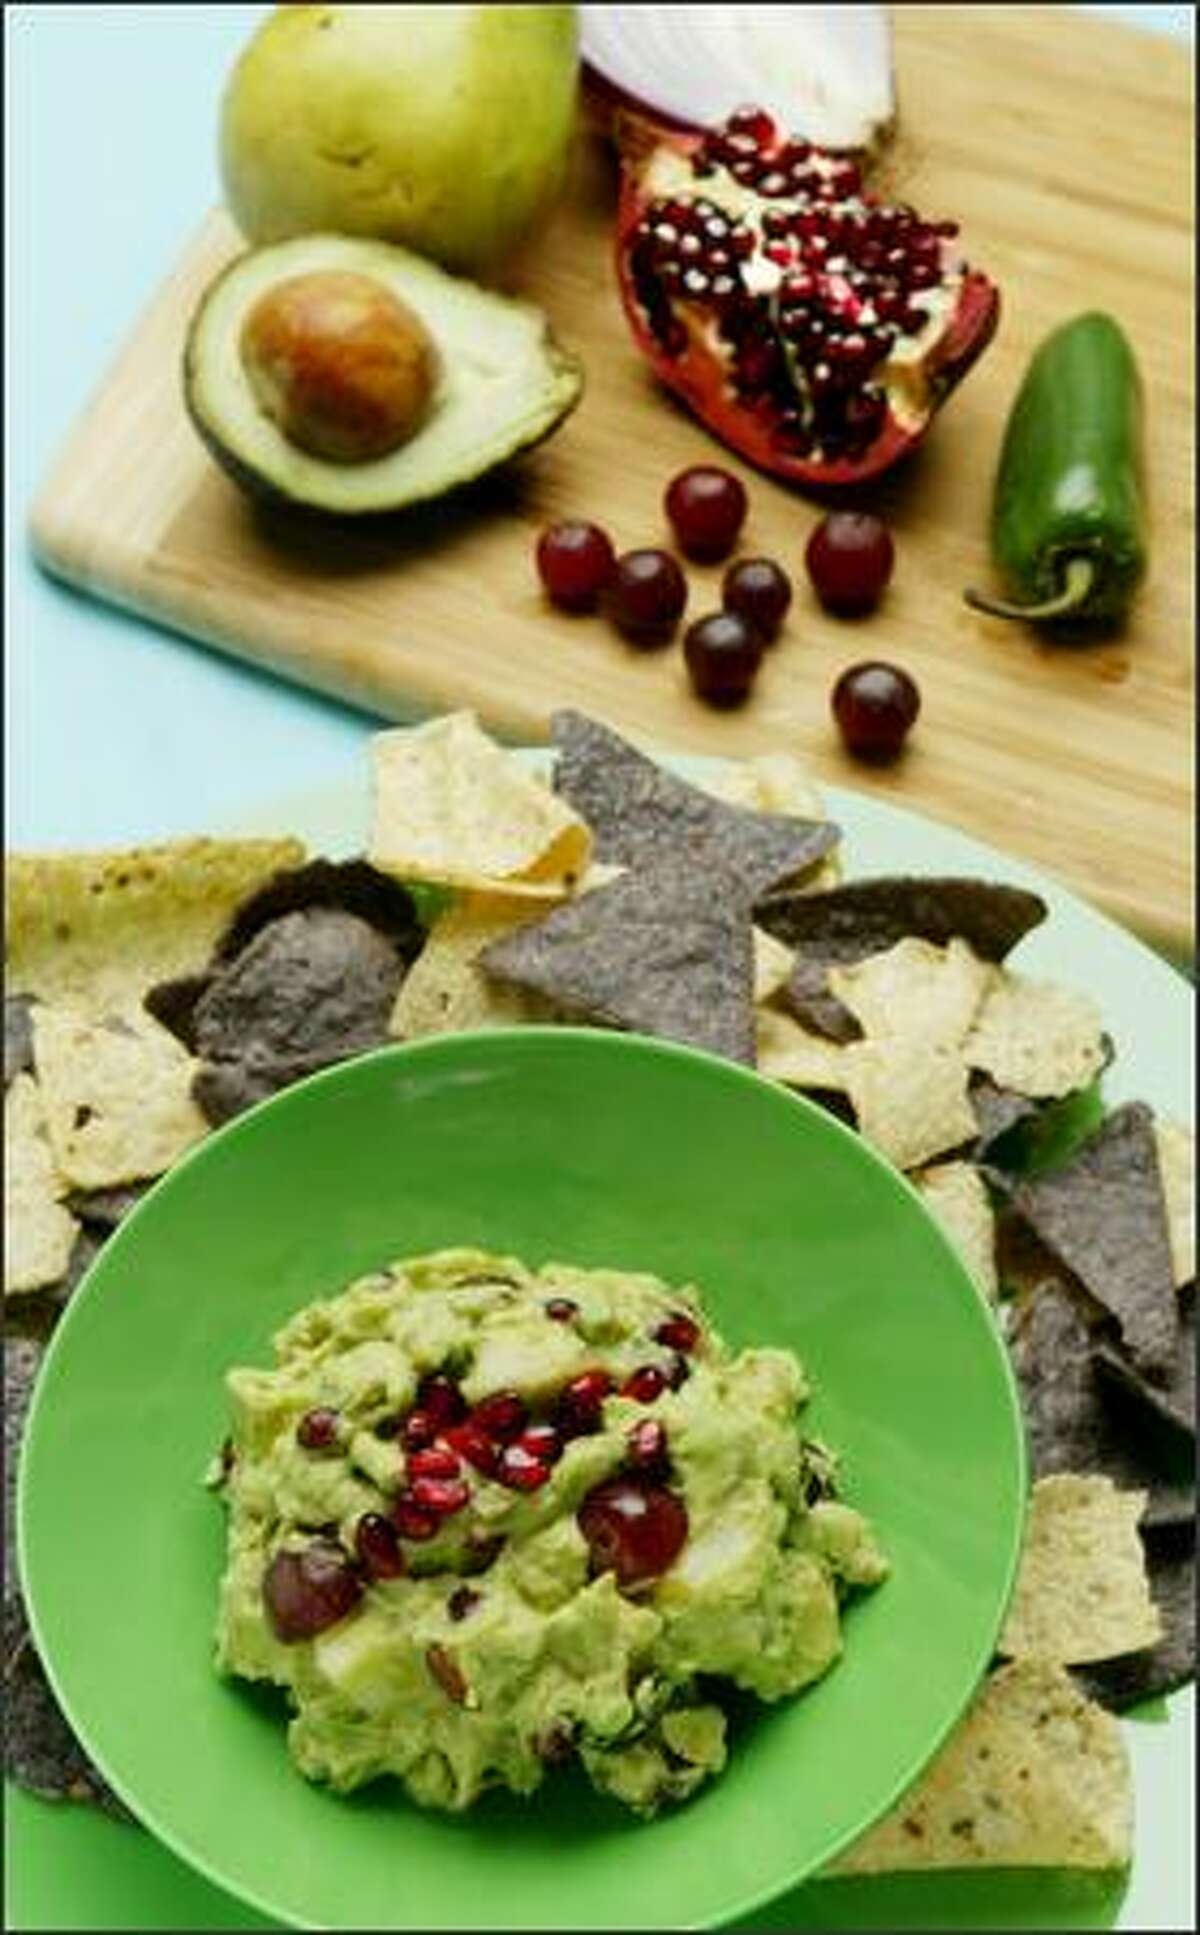 The Guacamole Chamacuero includes Bartlett pears, red grapes and oh-so-hip pomegranate seeds.